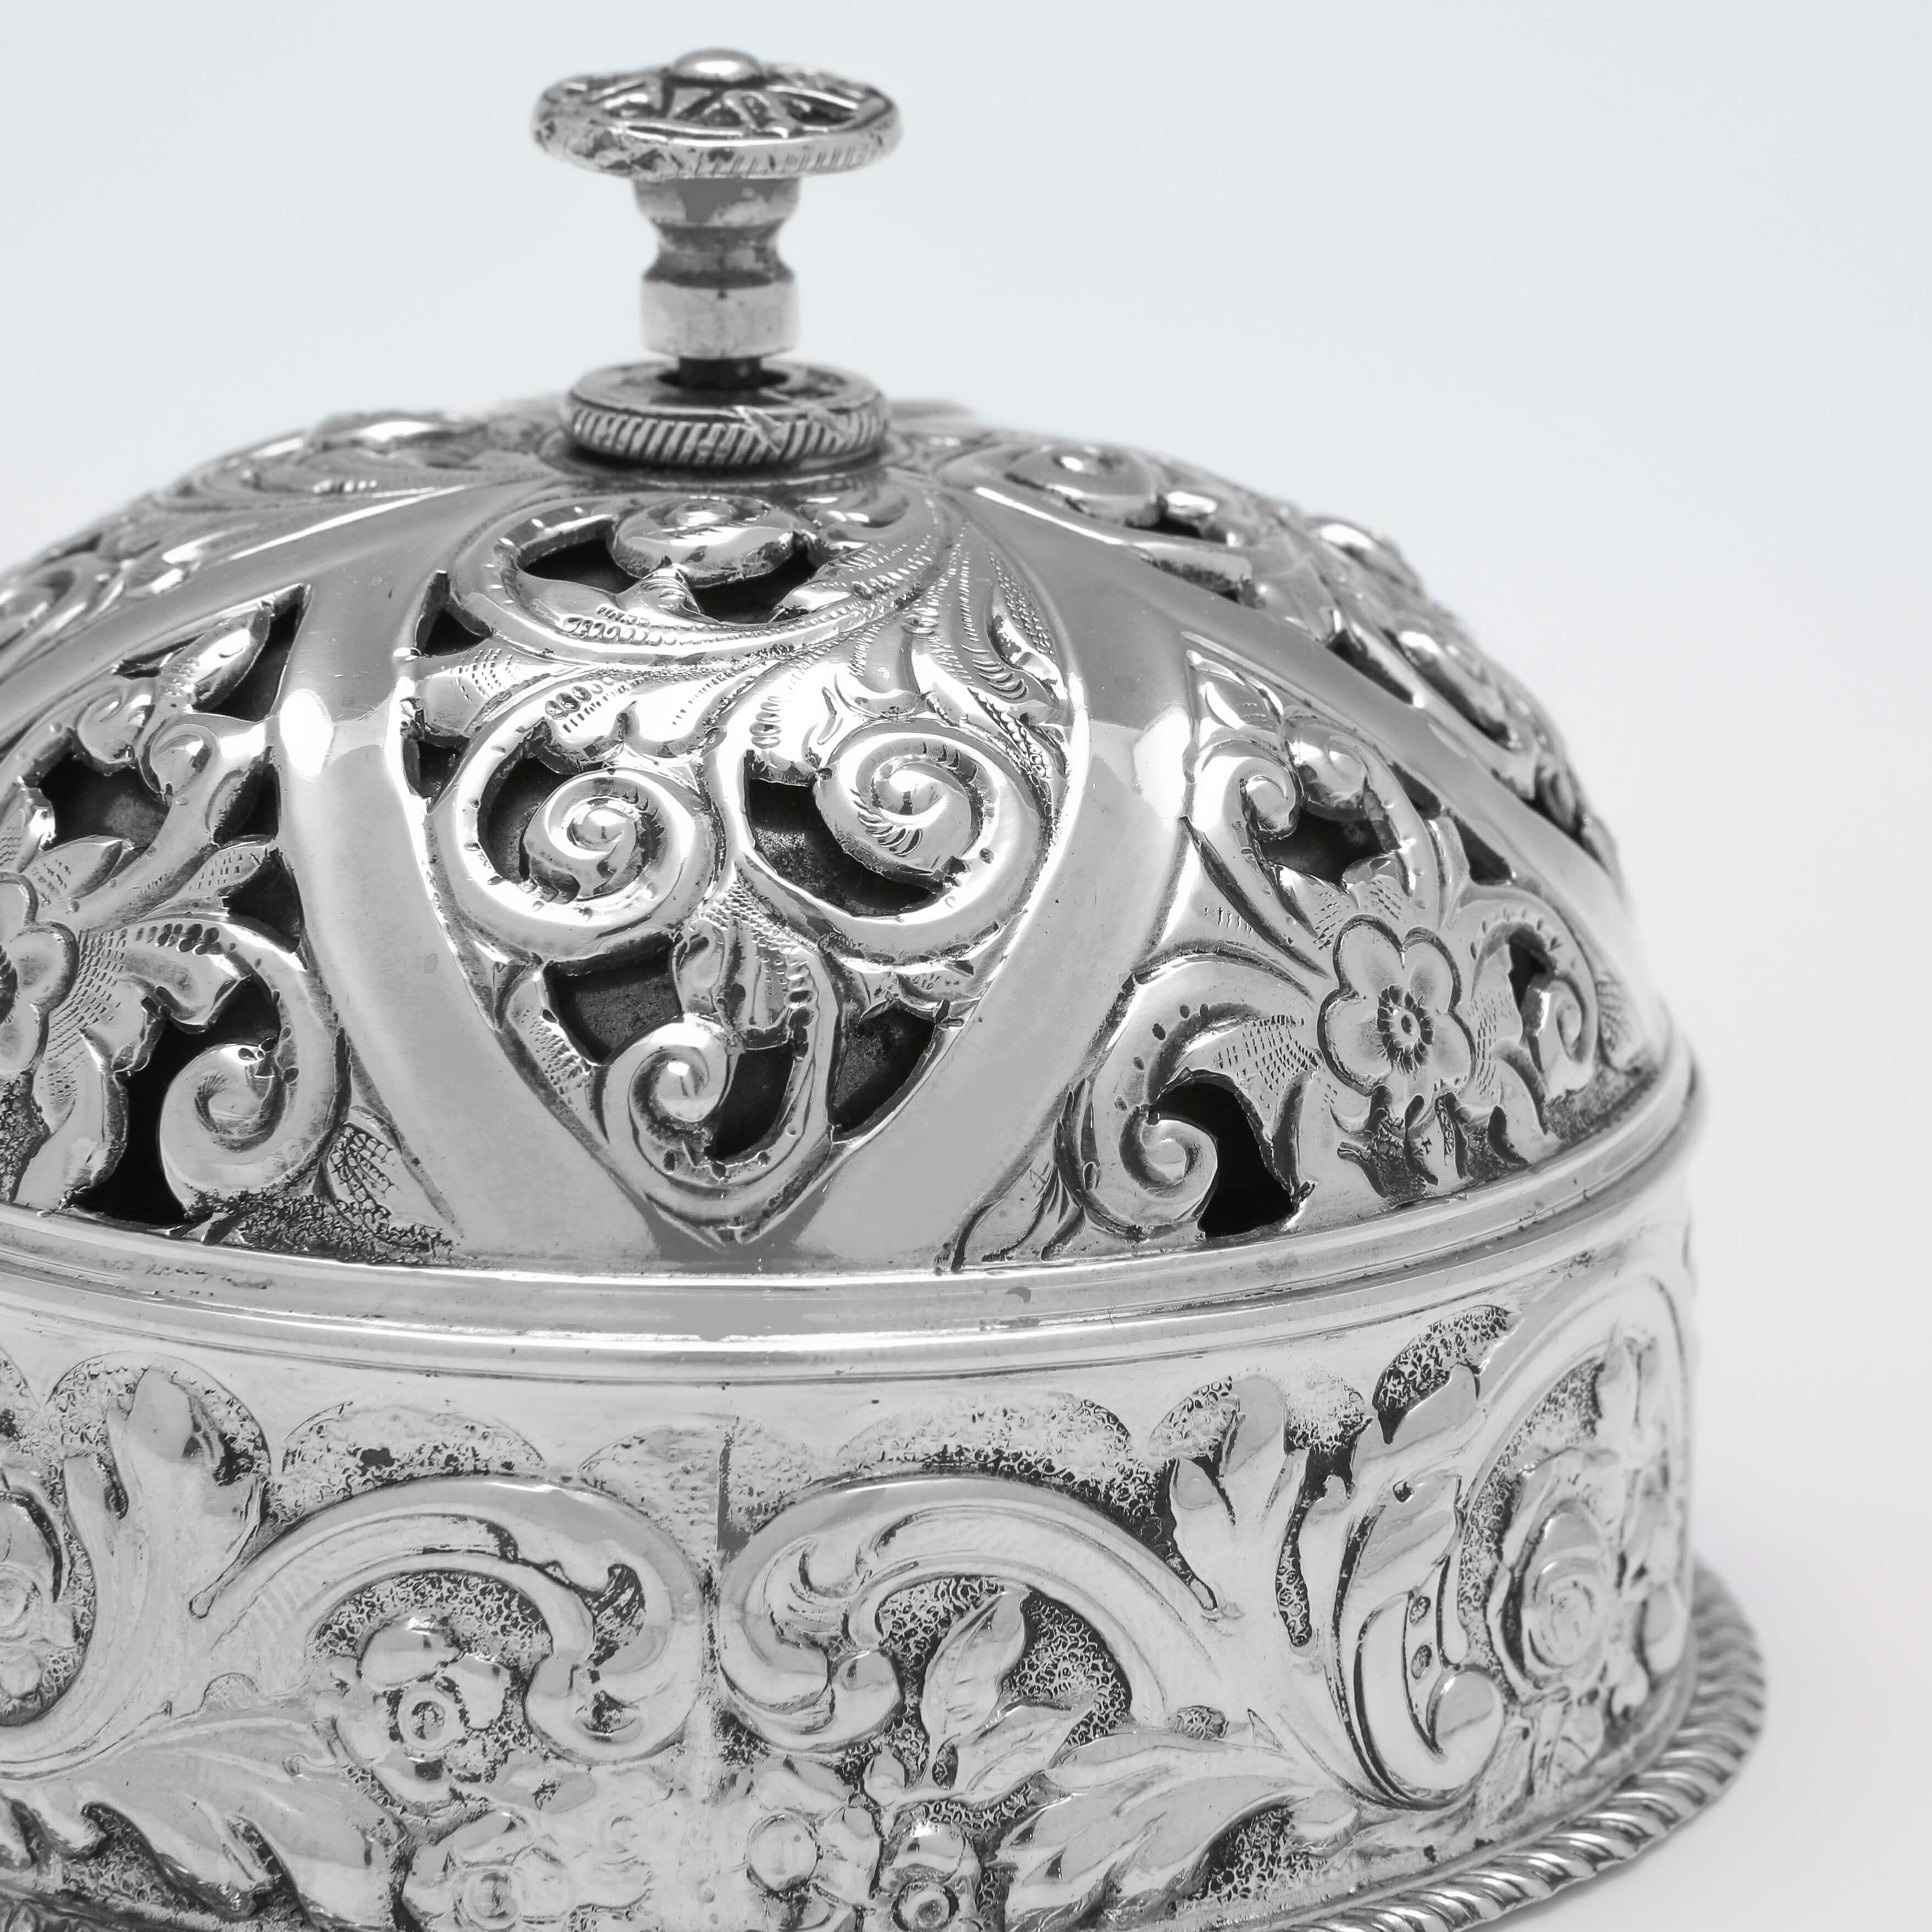 Hallmarked in London in 1903 by William Hutton & Sons, this attractive, Edwardian, antique sterling silver bell, is ornate in design. 

The bell measures 2.75